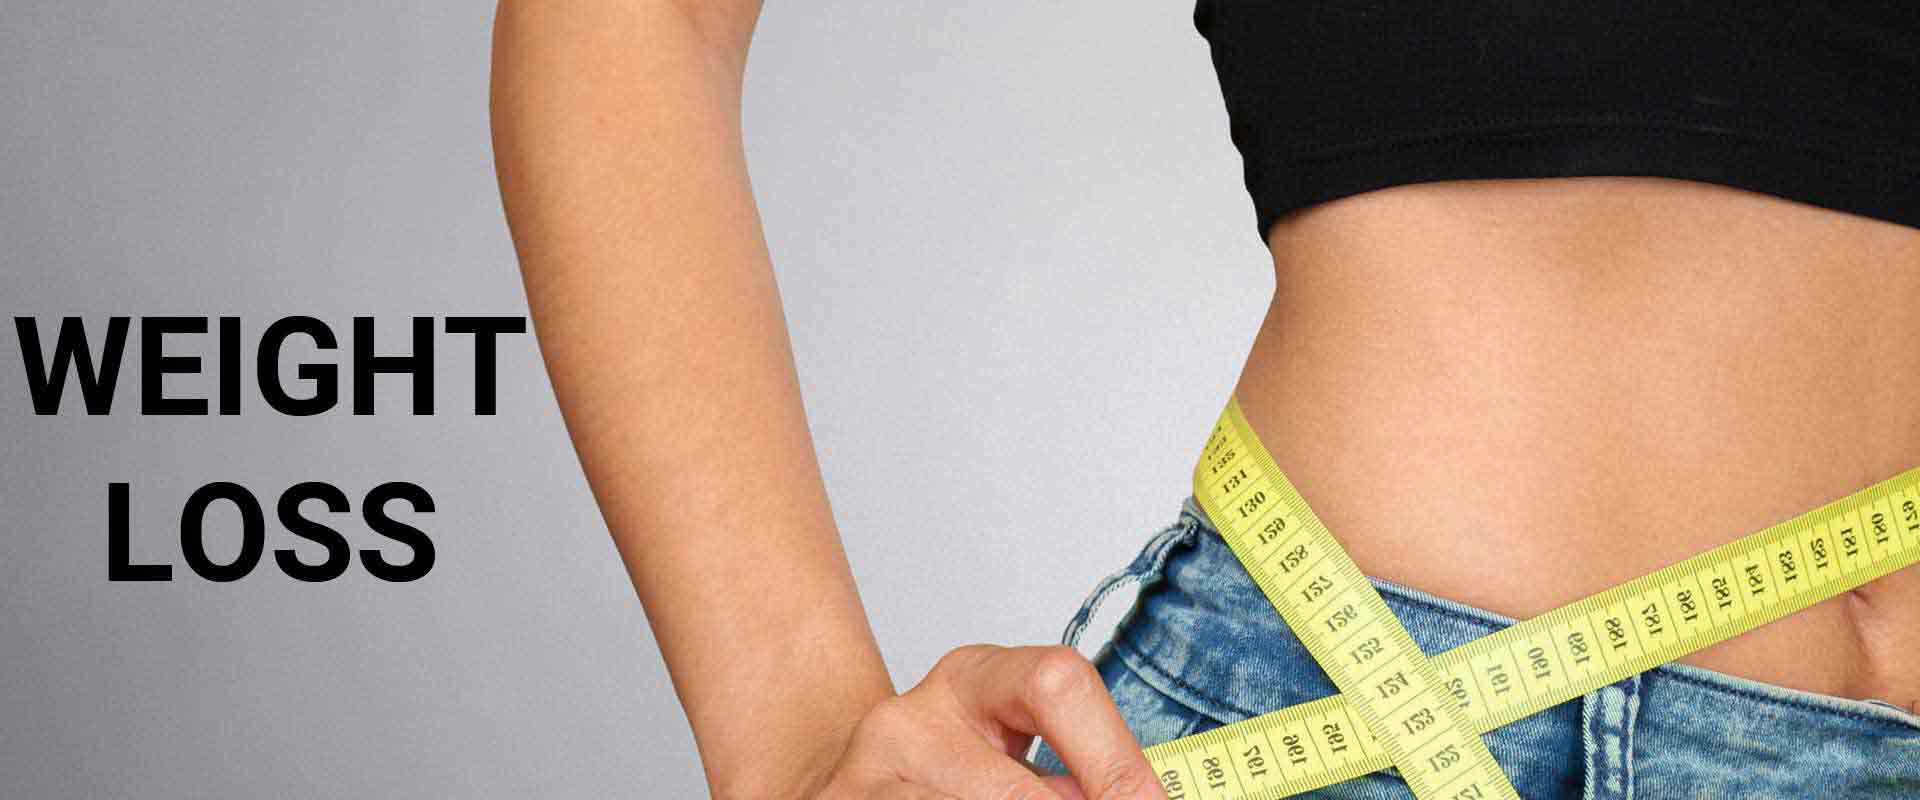 Diet For Weight Loss In Senneterre